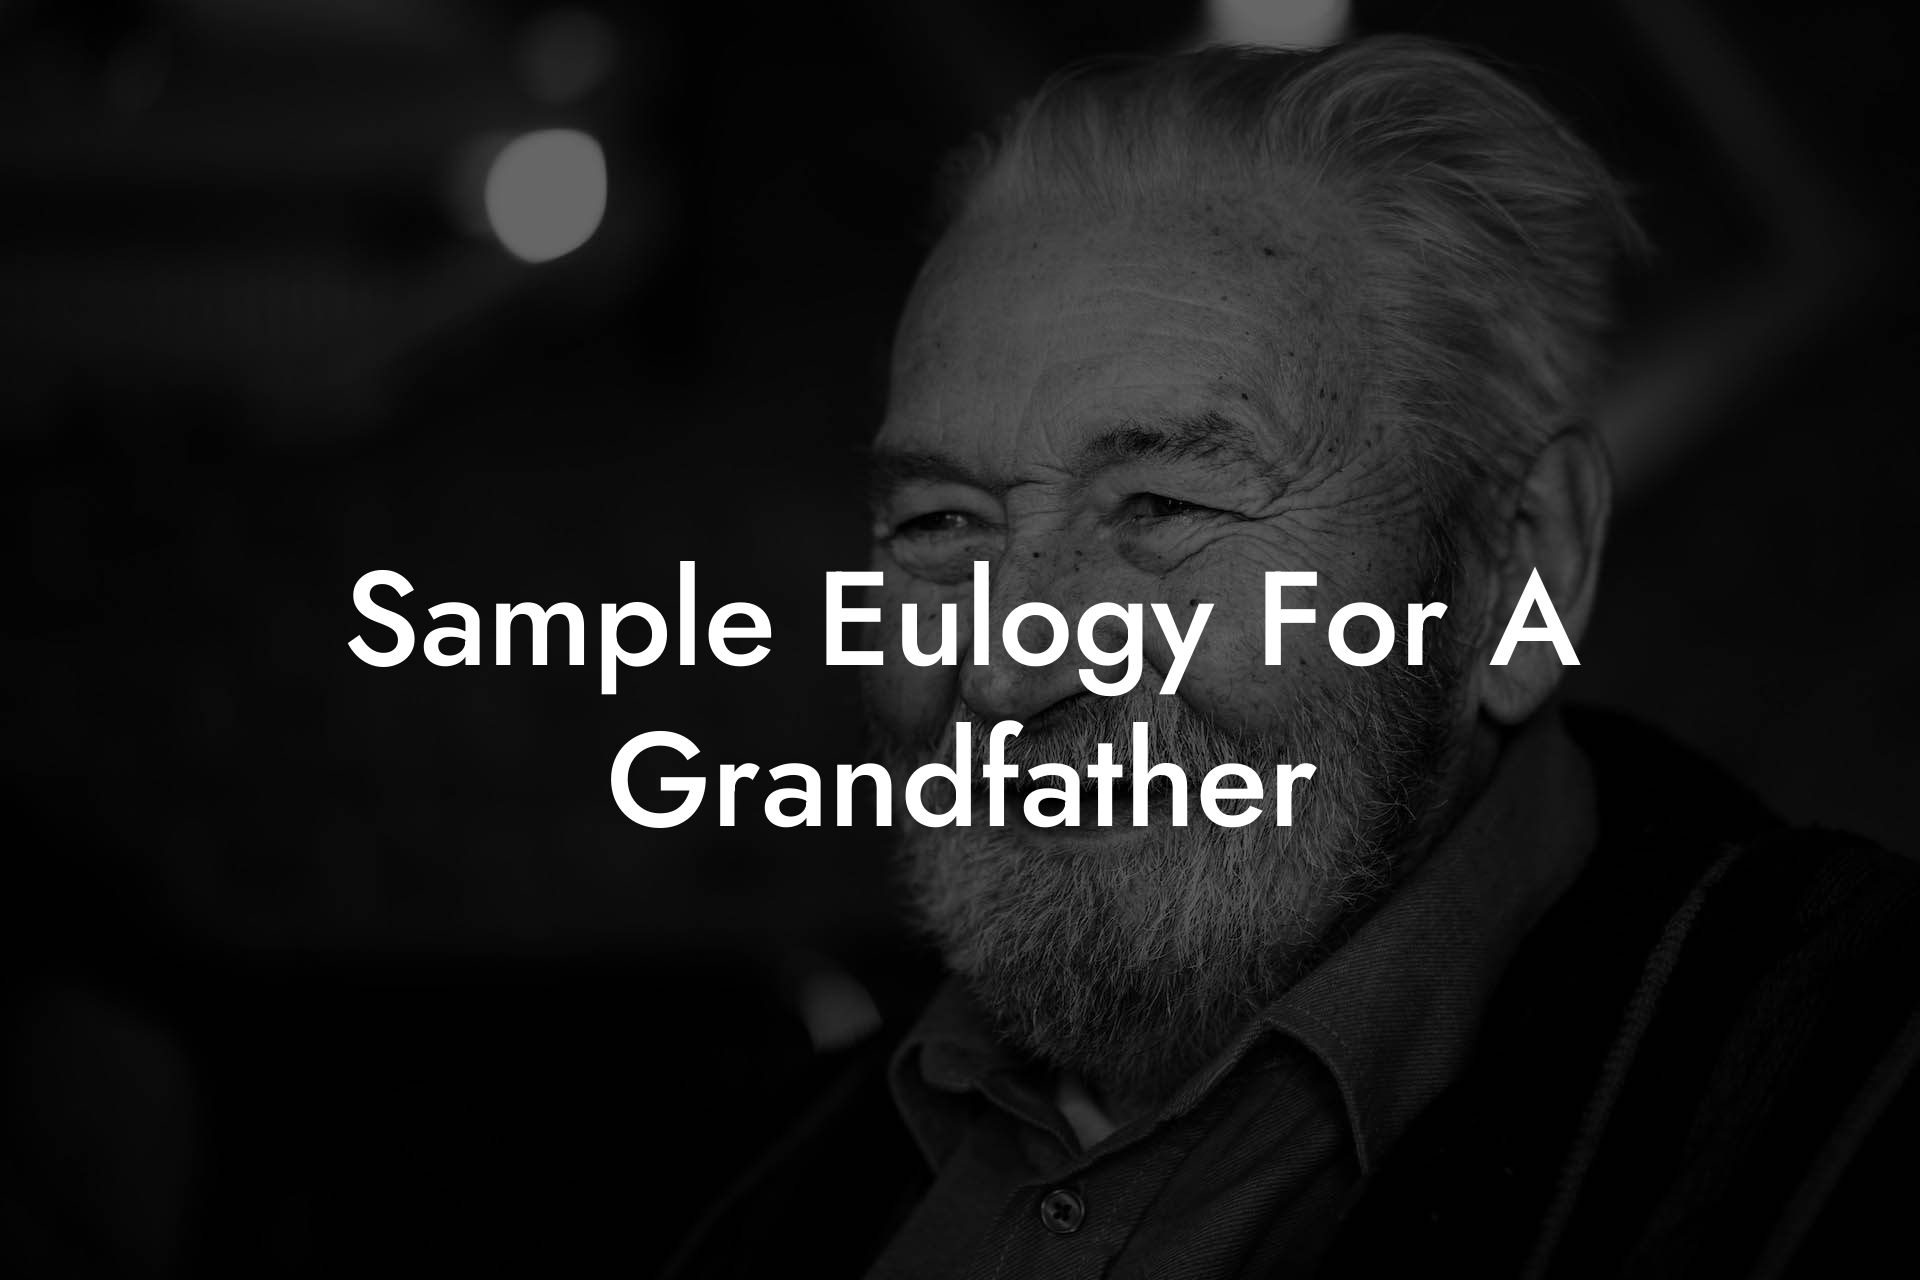 Sample Eulogy For A Grandfather